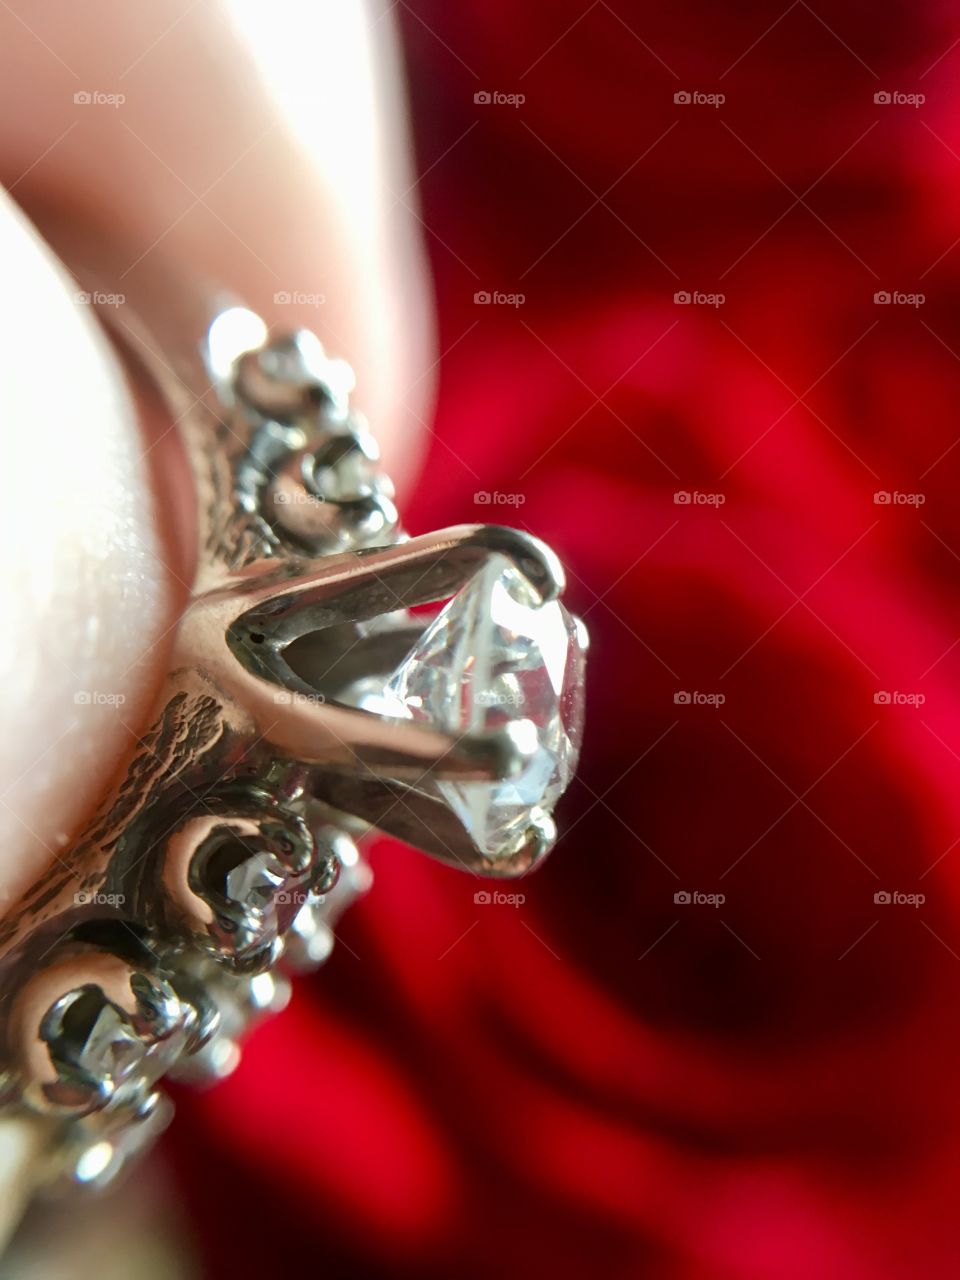 Engagement ring with rose background 